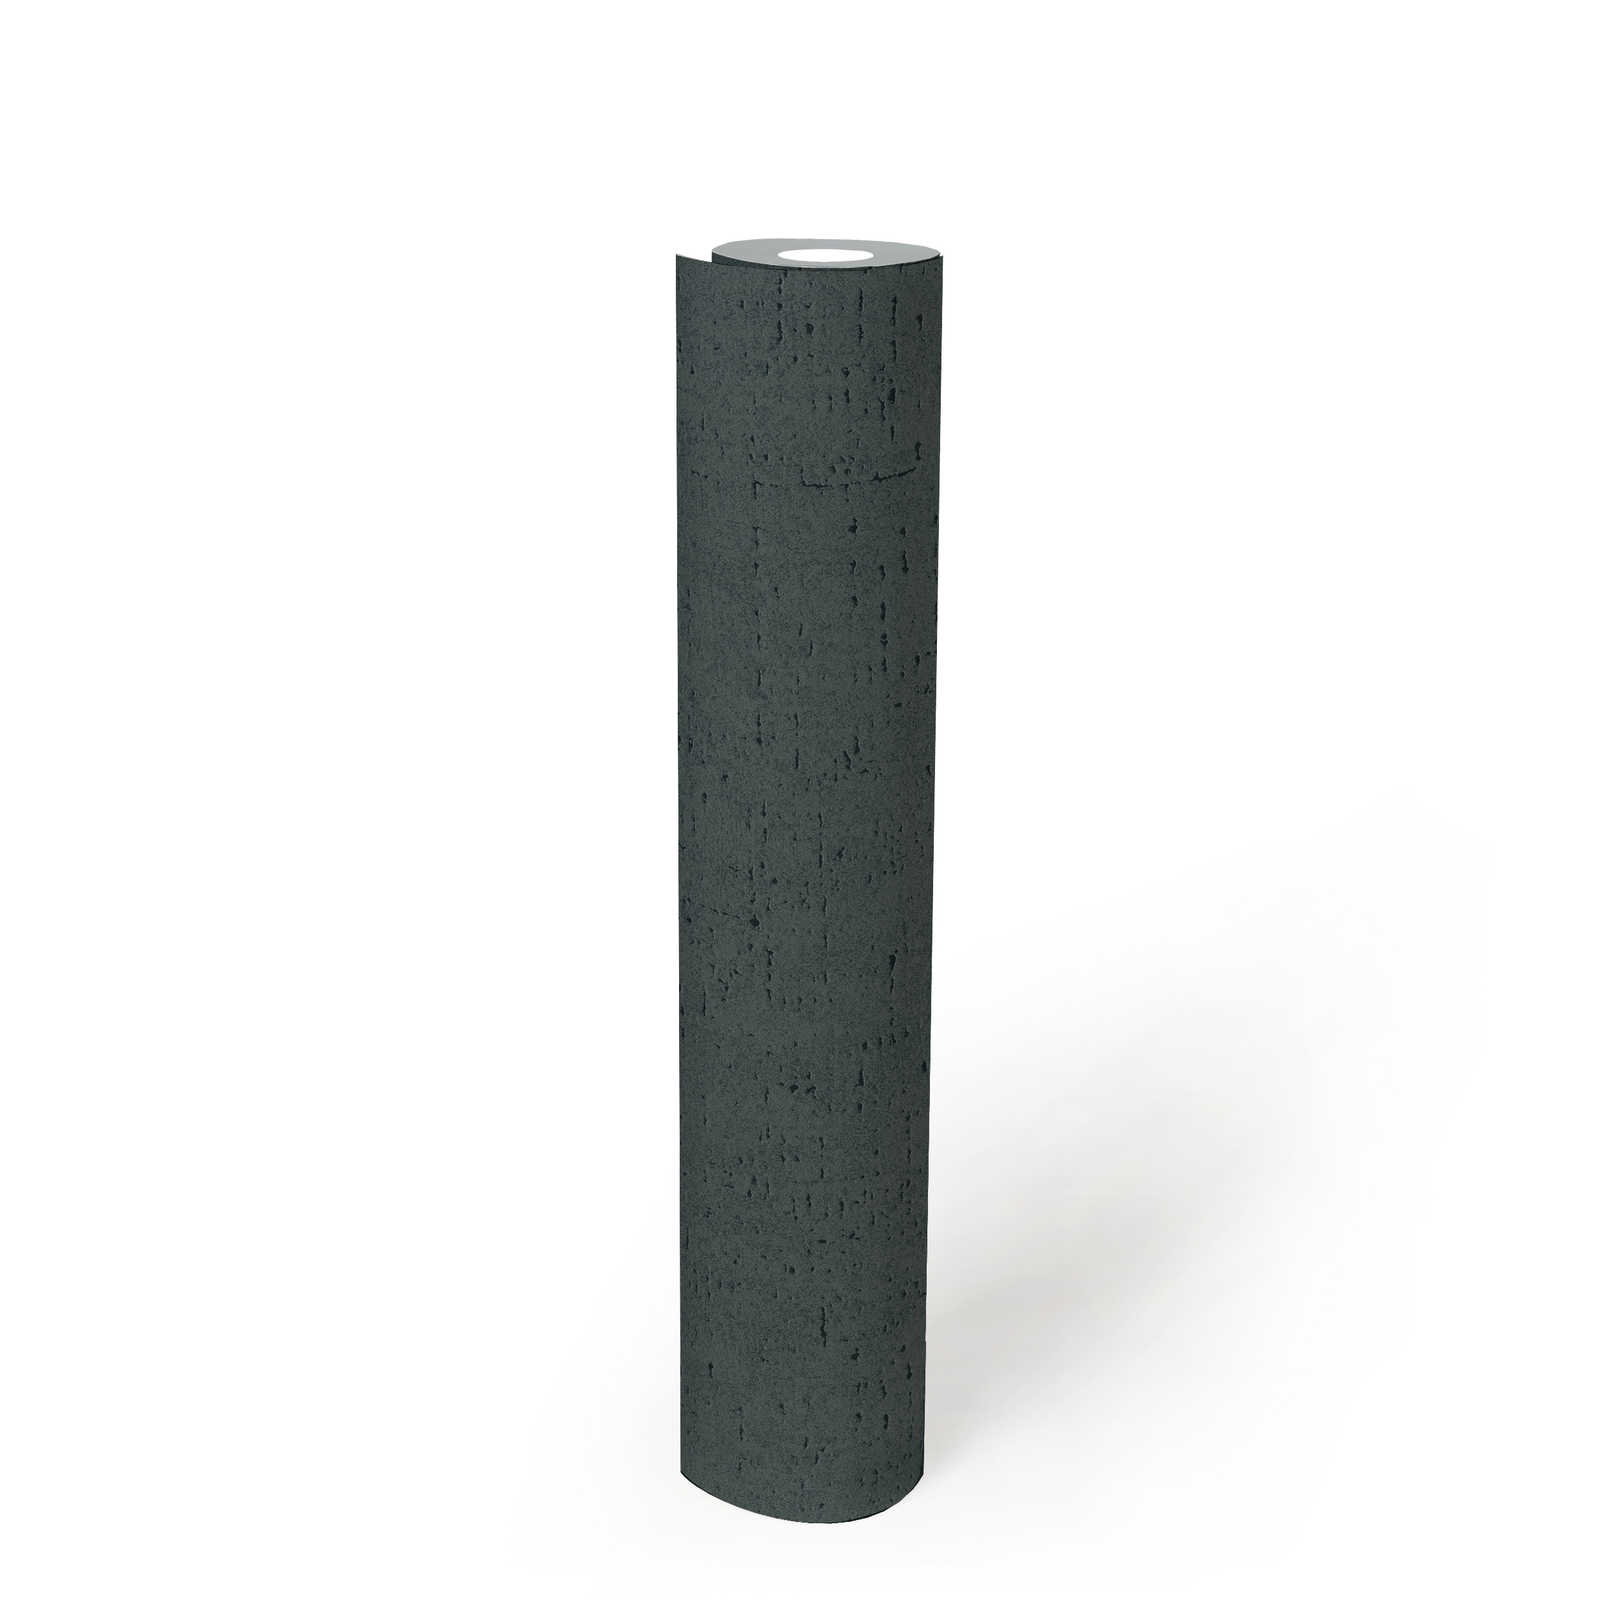             Non-woven wallpaper with texture pattern in mottled style - black
        